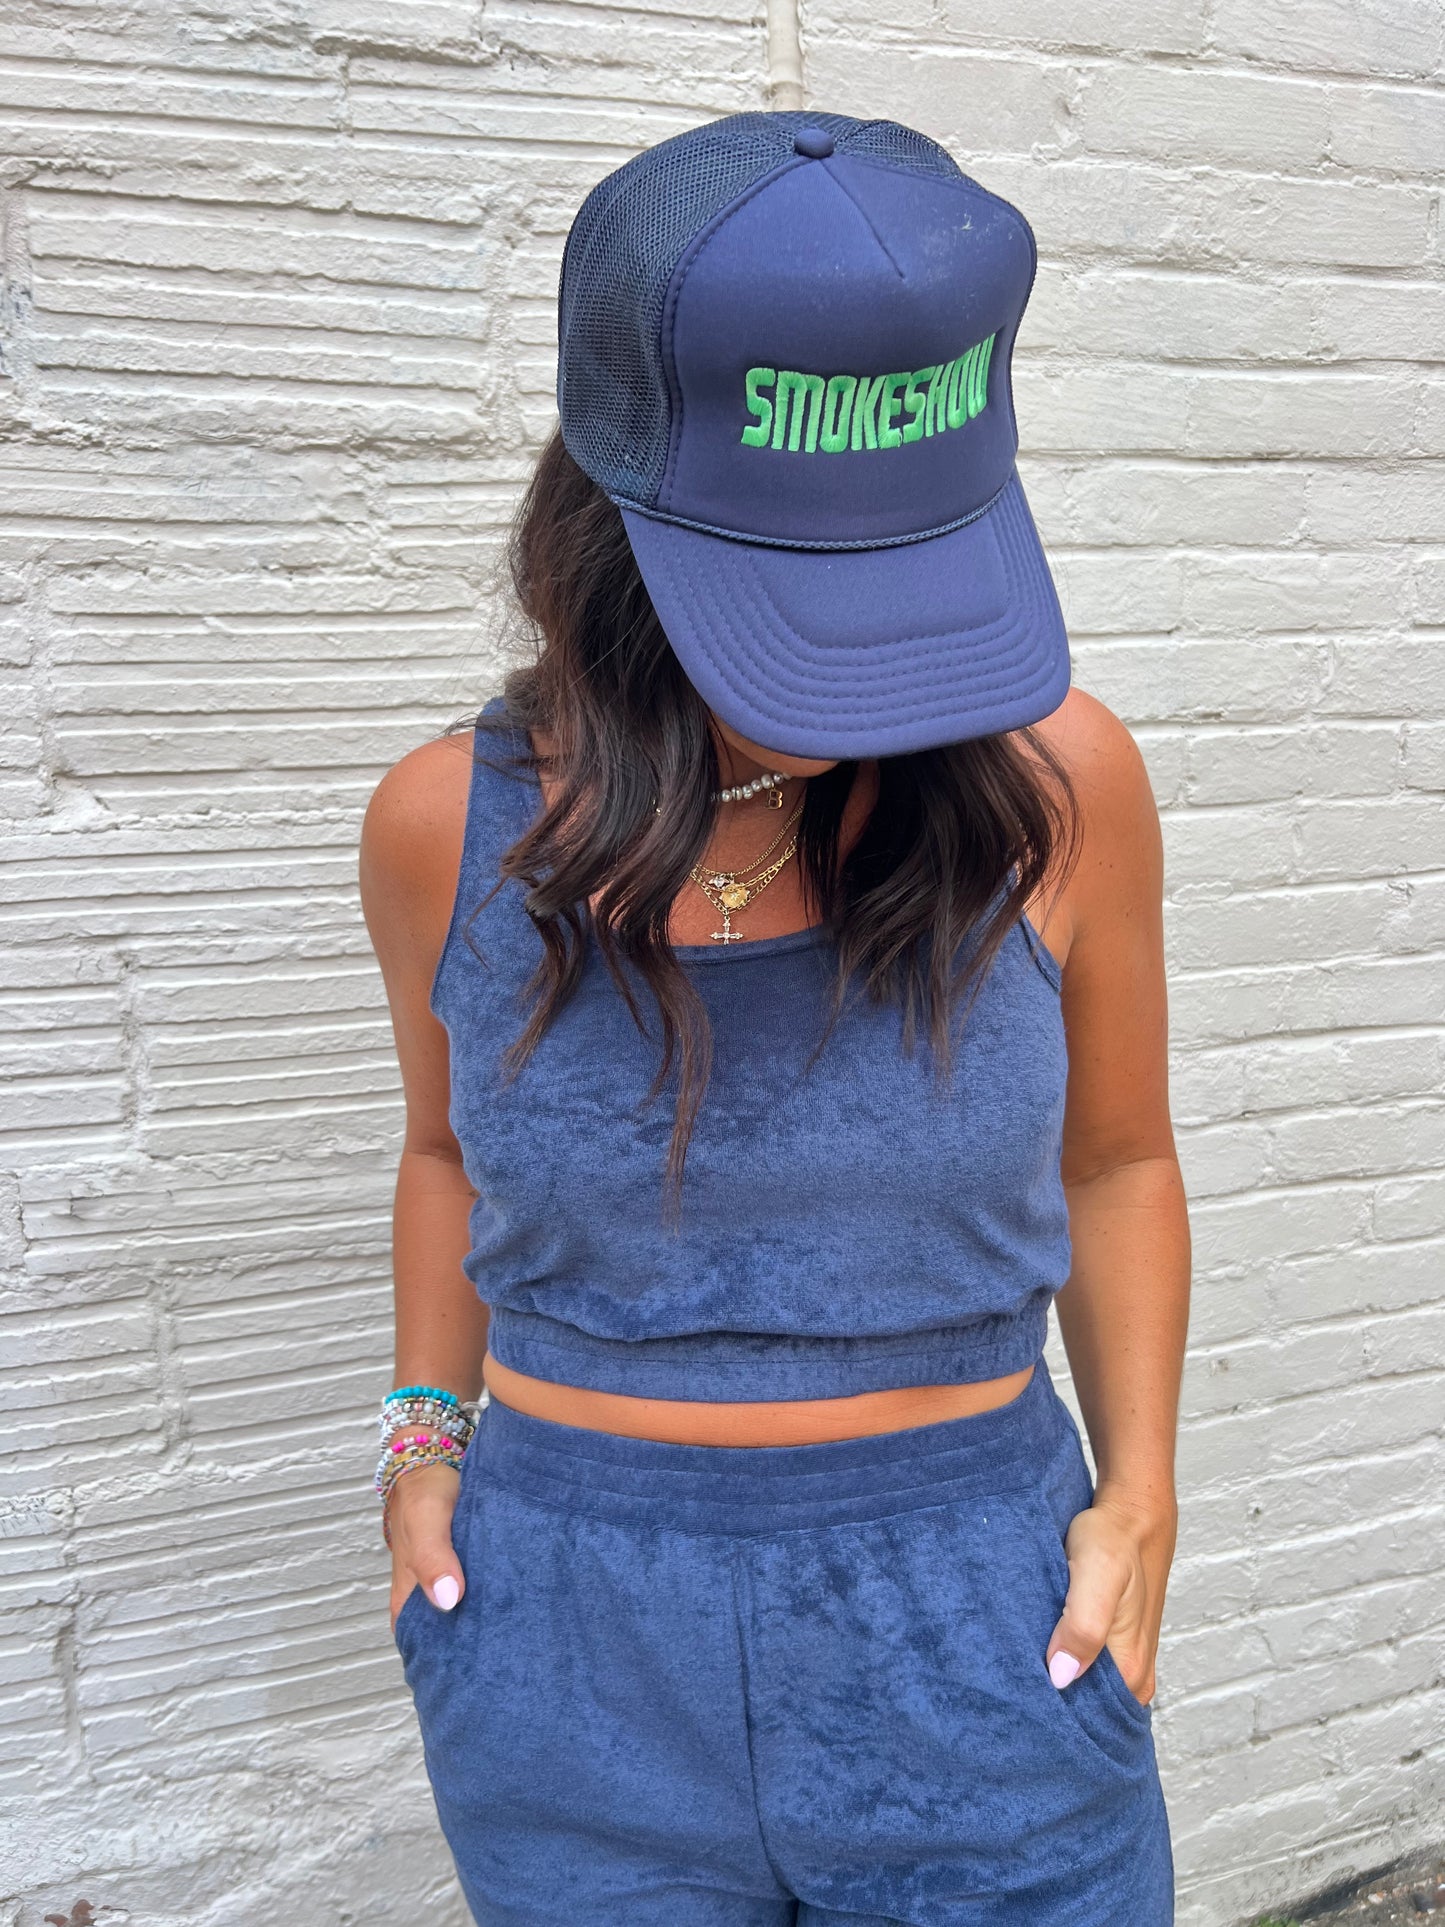 SMOKESHOW TRUCKER HAT - THE HIP EAGLE BOUTIQUE